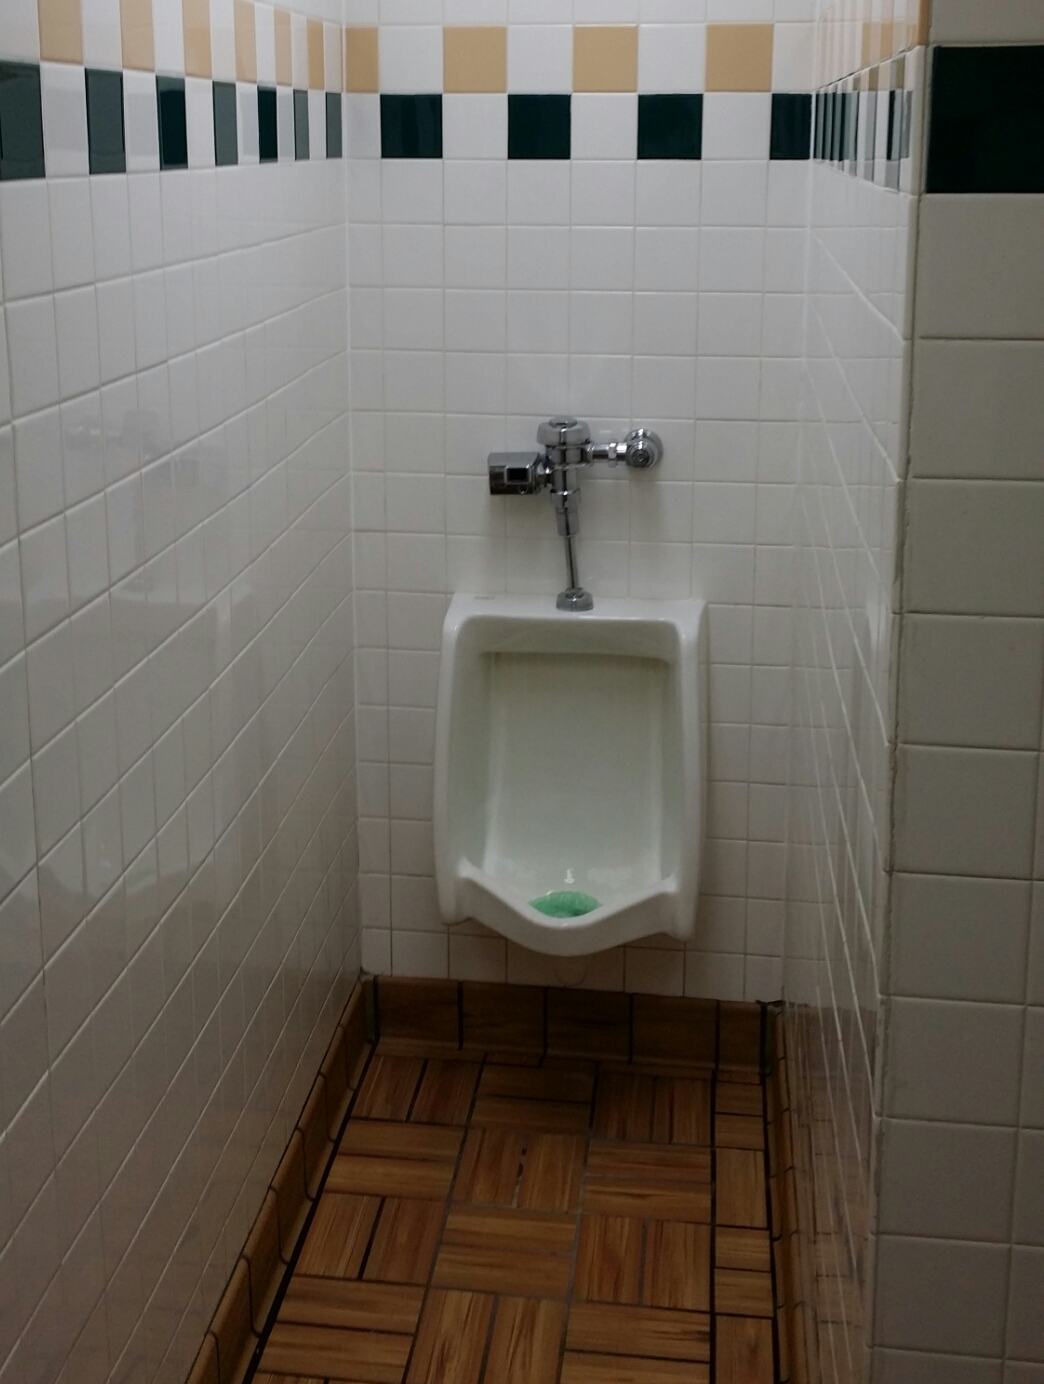 Only men will understand the joy when we see urinals like this.